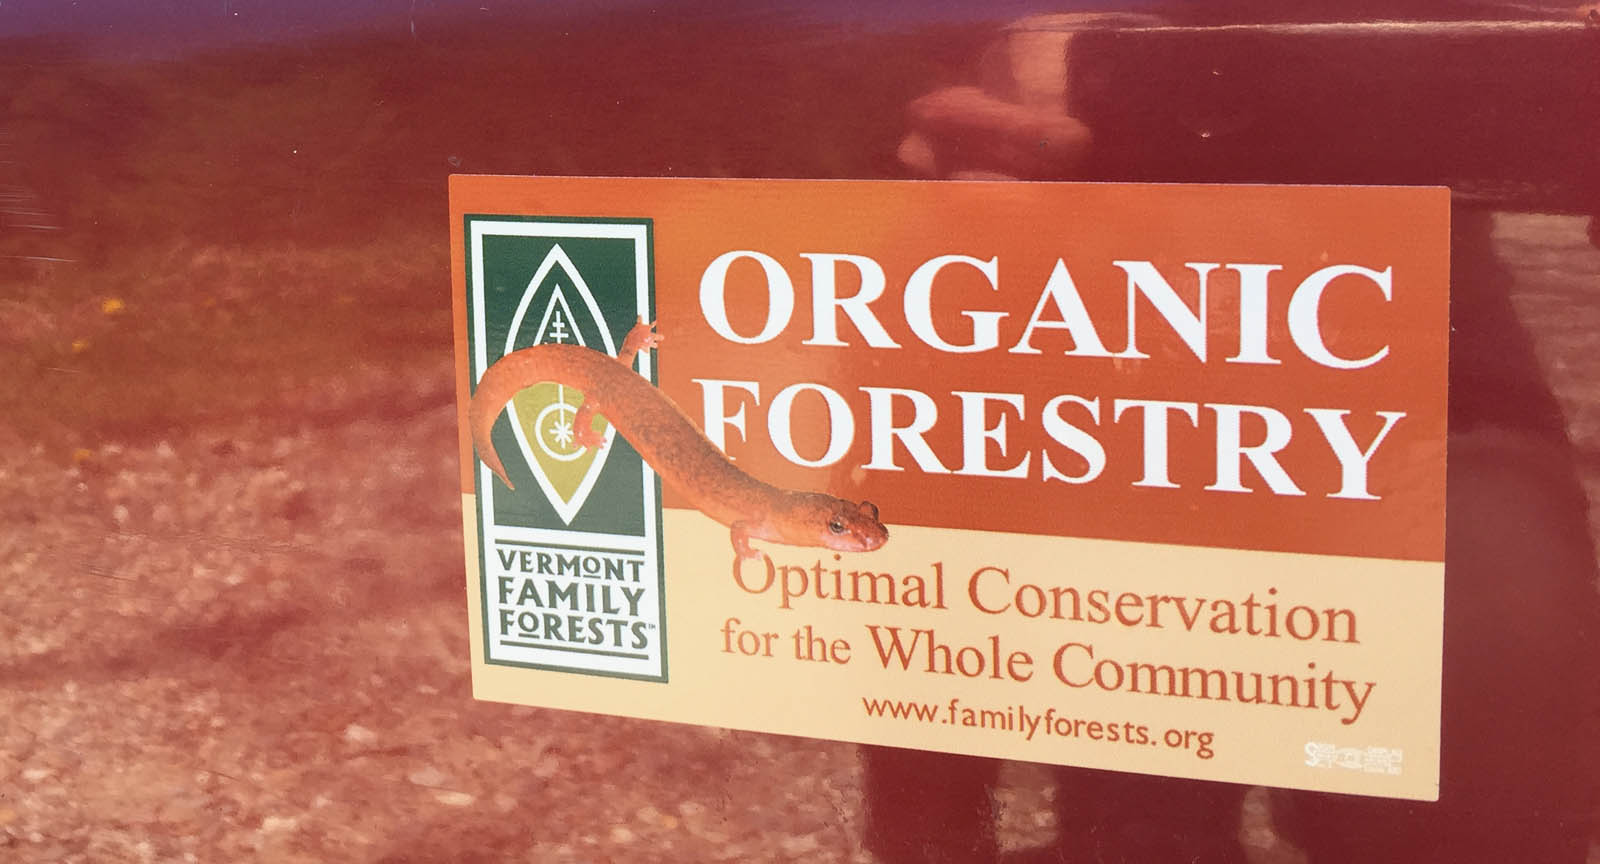 Featured image for “New Bumper Sticker Celebrates Organic Forestry”